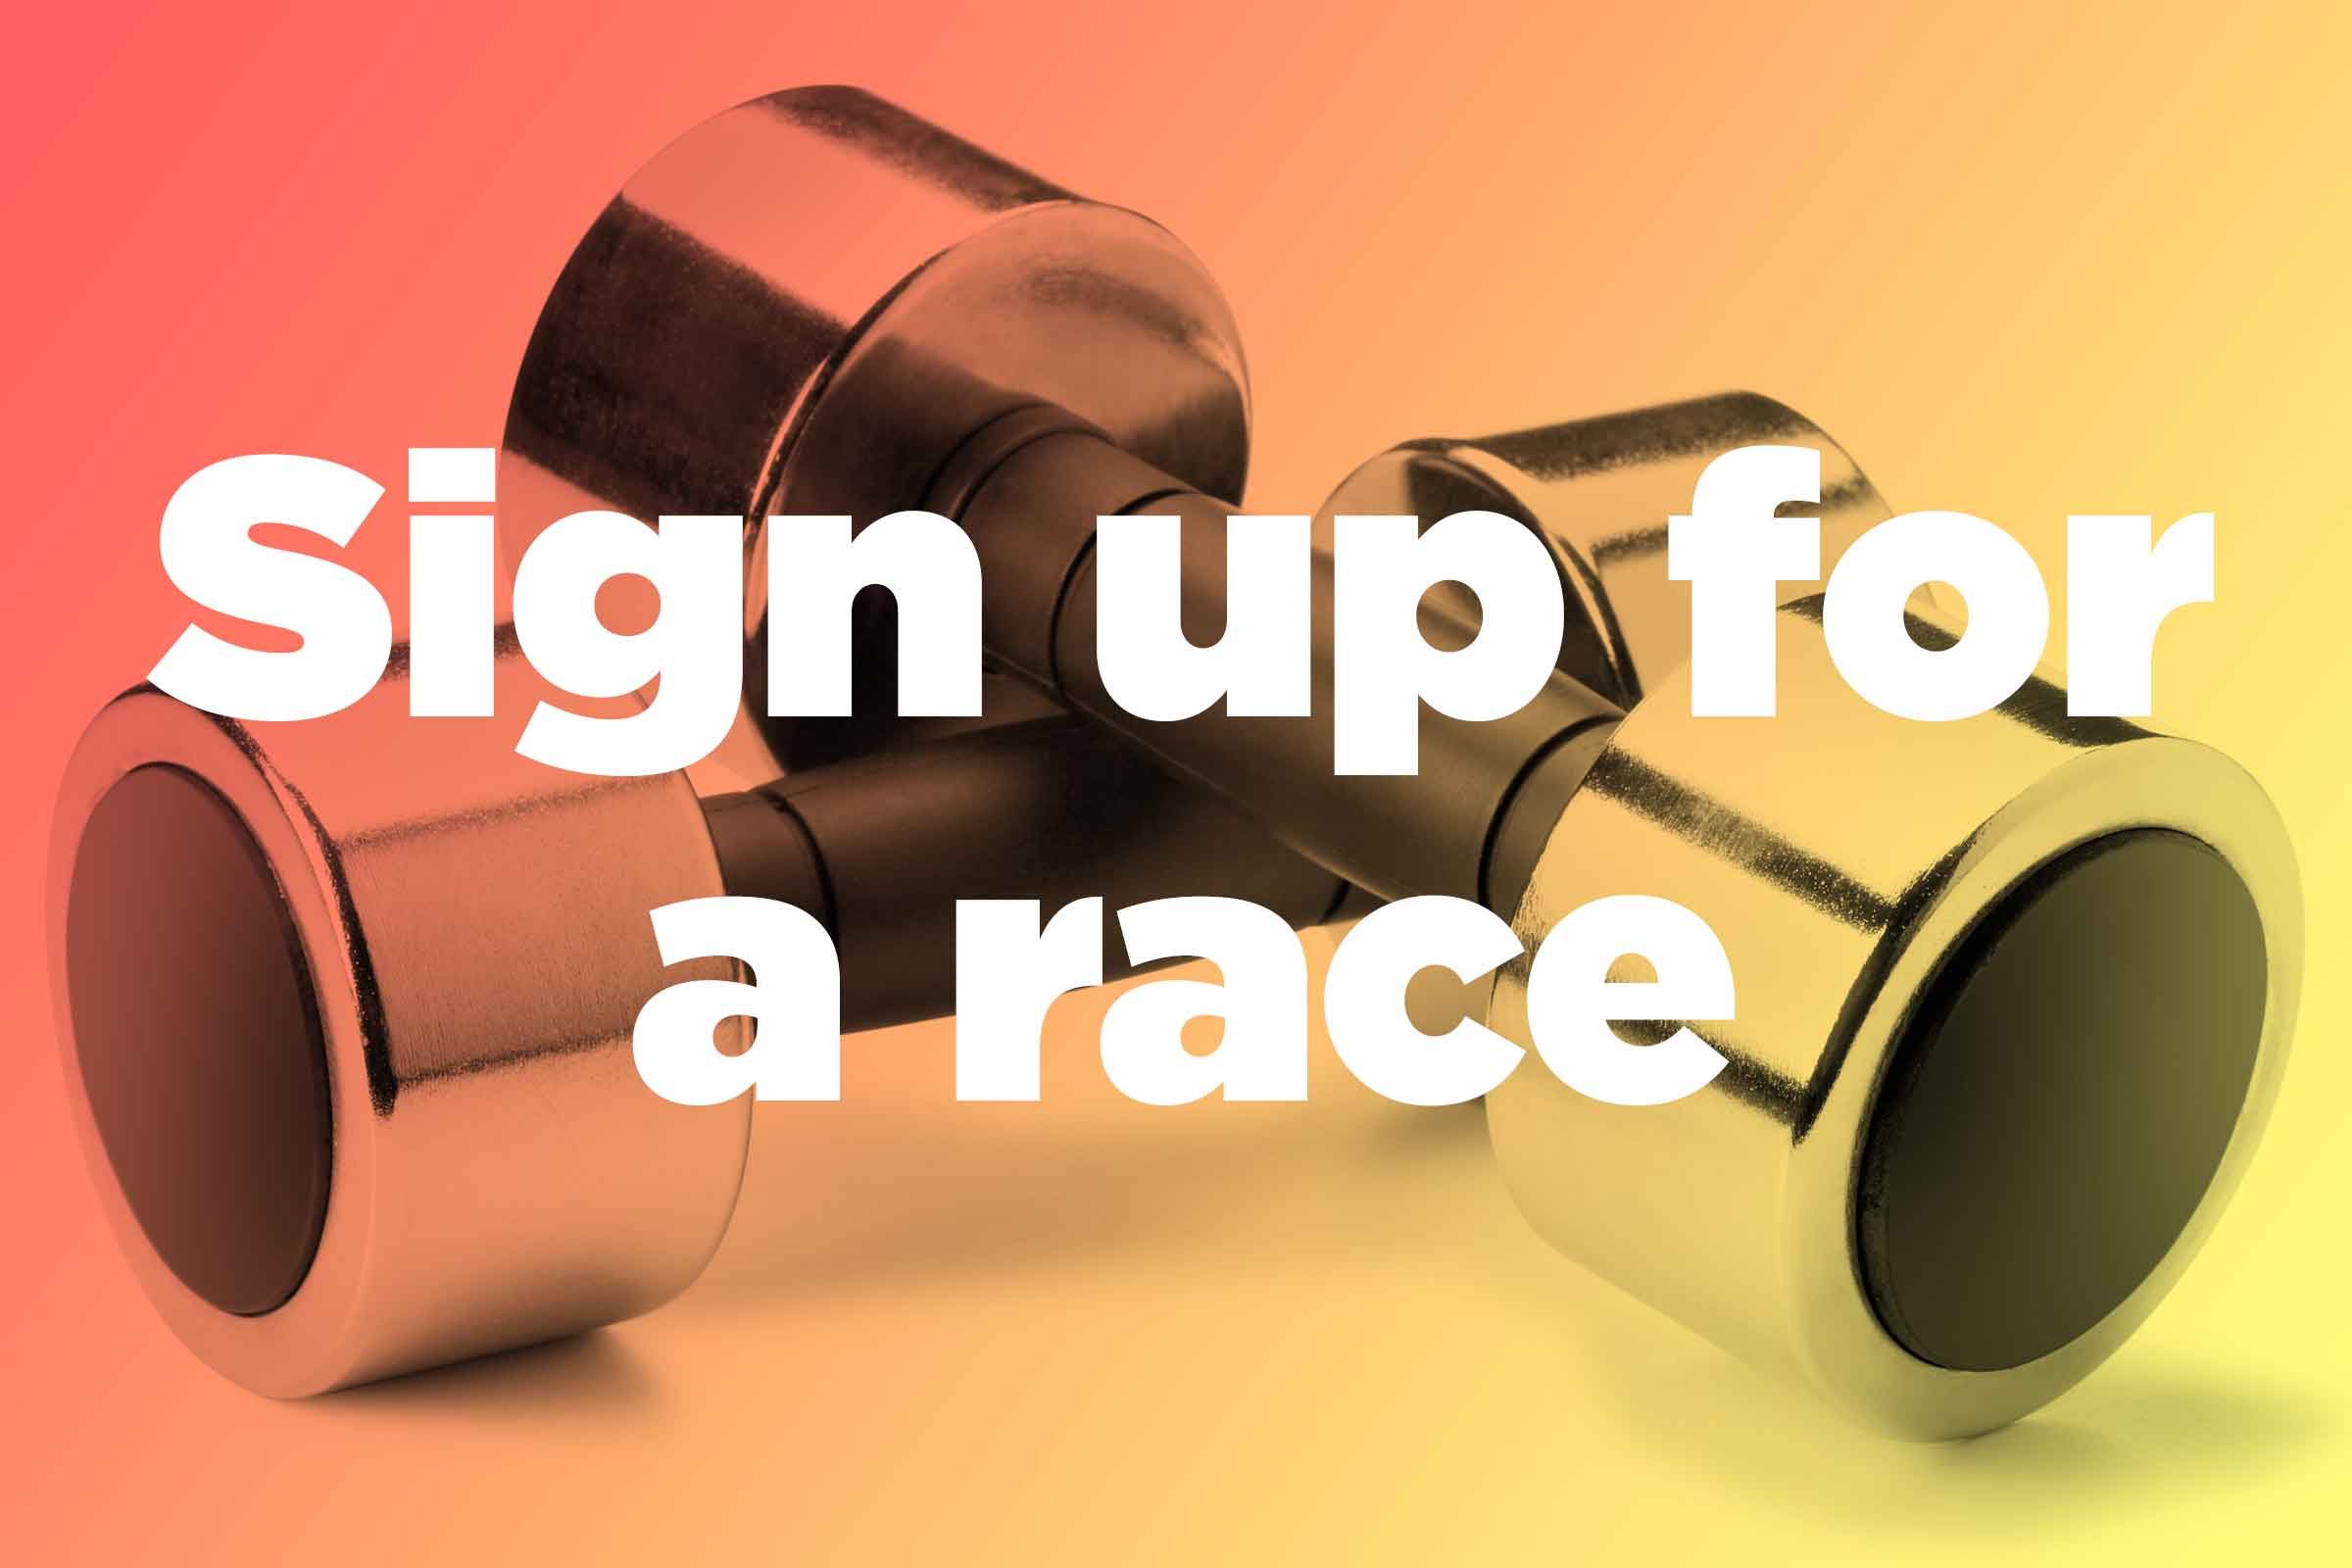 Sign up for a race